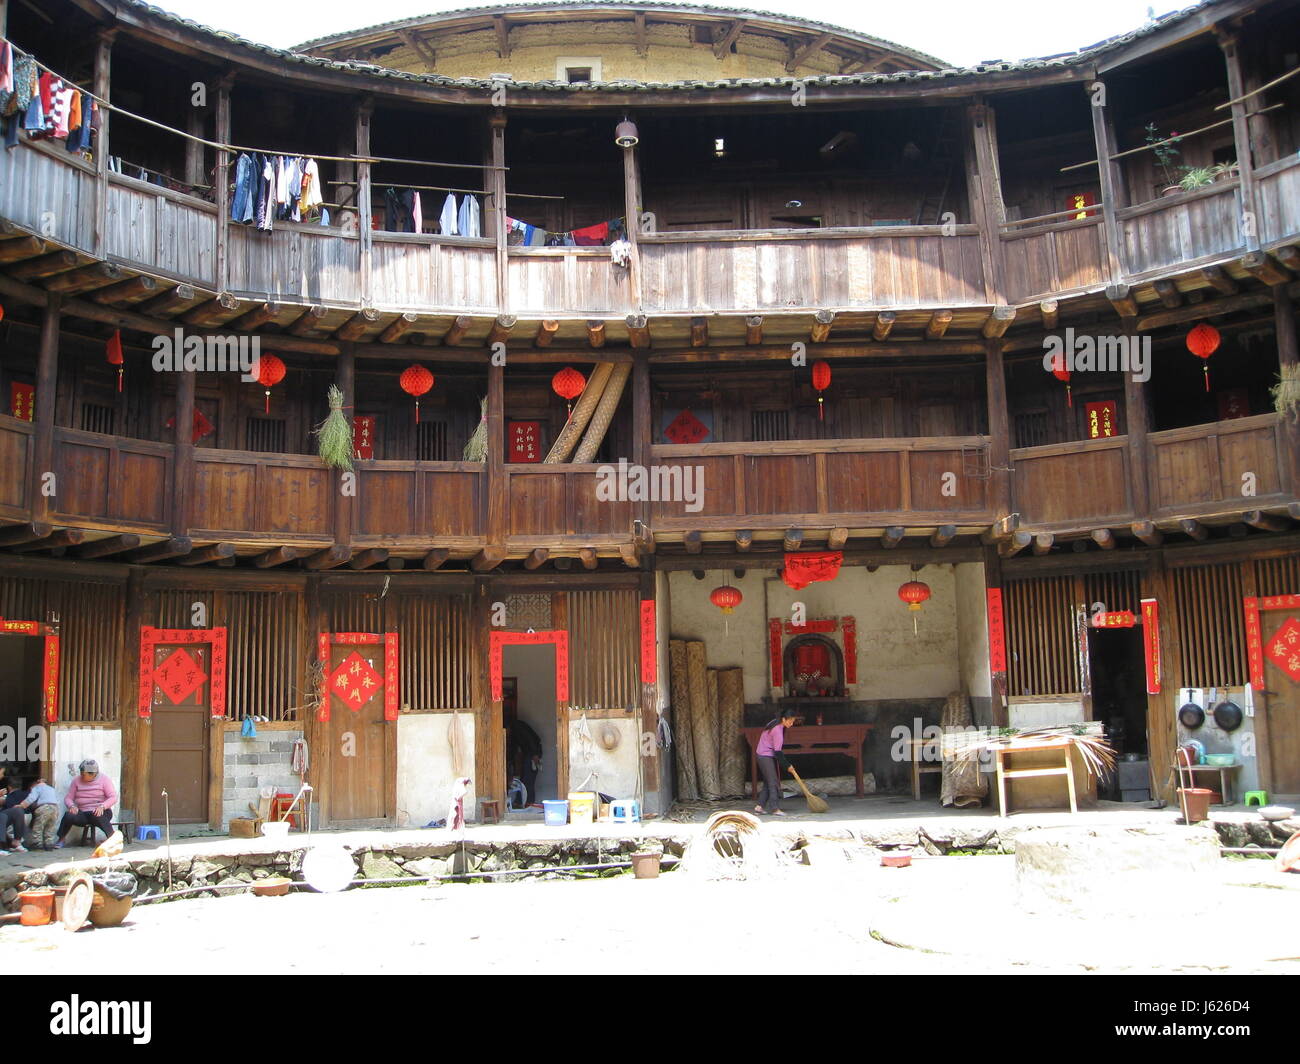 Zhangzh, Zhangzh, China. 18th May, 2017. Zhangzhou, CHINA-May 18 2017: (EDITORIAL USE ONLY. CHINA OUT) .The Nanjing tulou, also known as Nanjing earthen buildings, are Chinese rural dwellings unique to the Hakka in the mountainous areas in southeast China's Fujian Province. The architectures, were mostly built between the 12th and the 20th centuries. A total of 46 Fujian tulou sites were inscribed in 2008 by UNESCO as World Heritage Site, as ''exceptional examples of a building tradition and function exemplifying a particular type of communal living and defensive organization in a harmonious Stock Photo